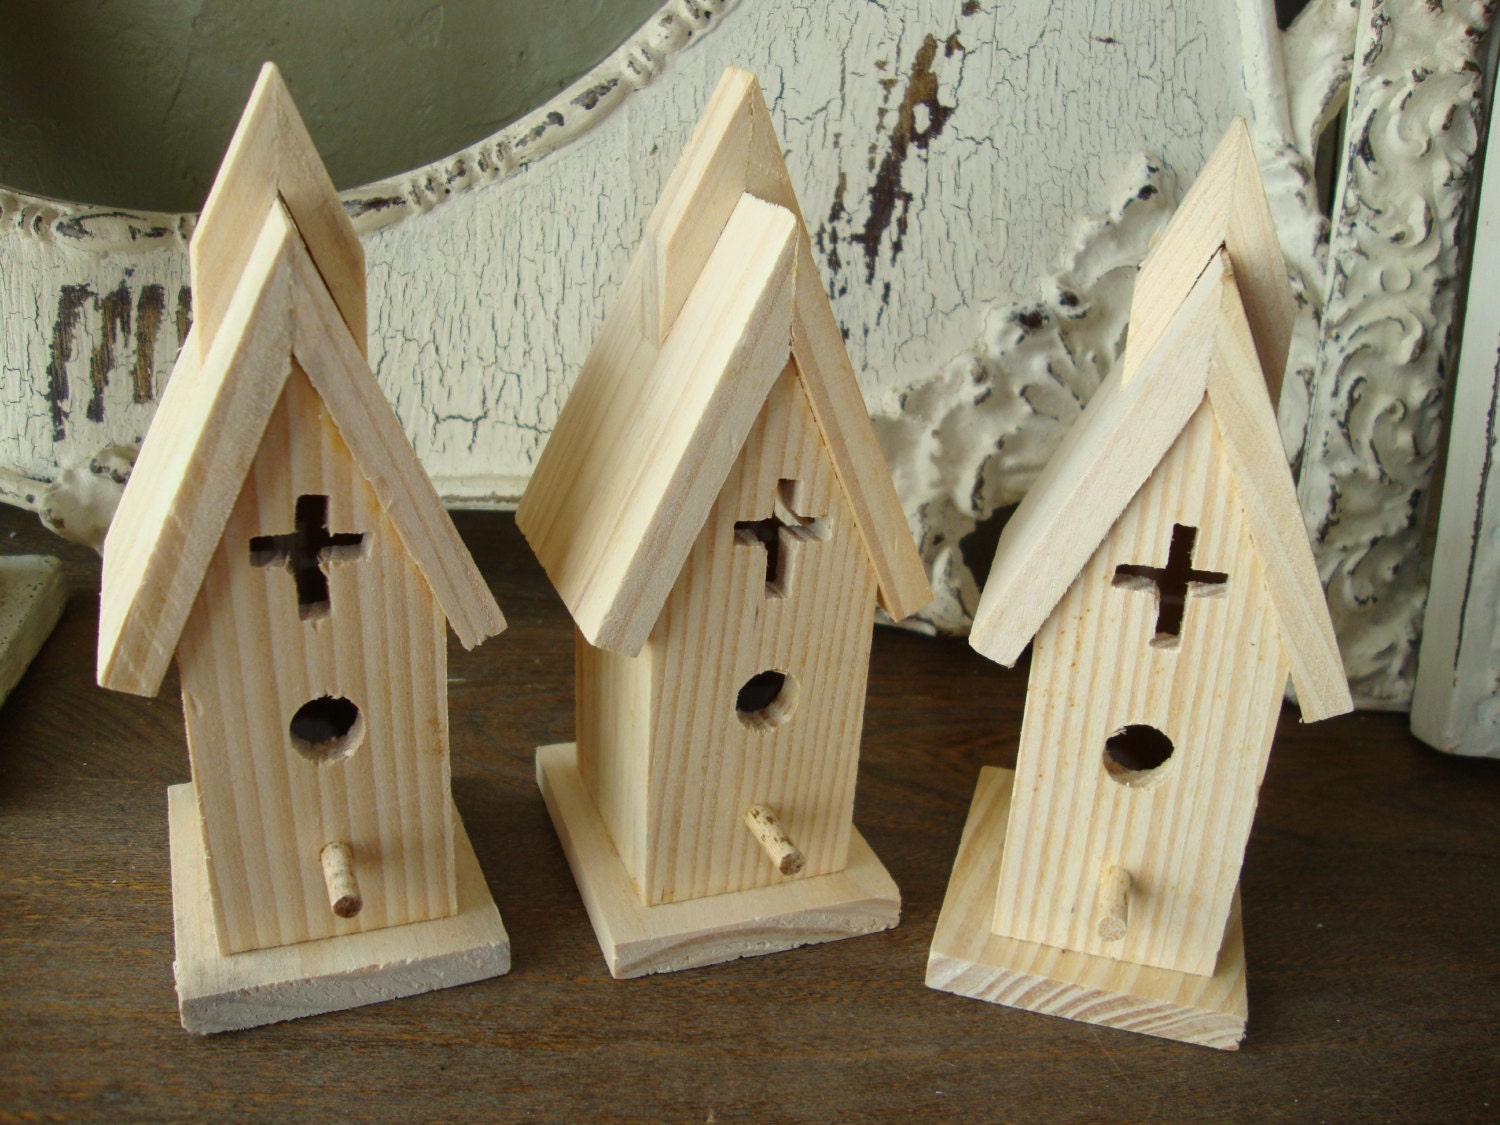 Wood birdhouse unfinished wooden 6 house craft supplies